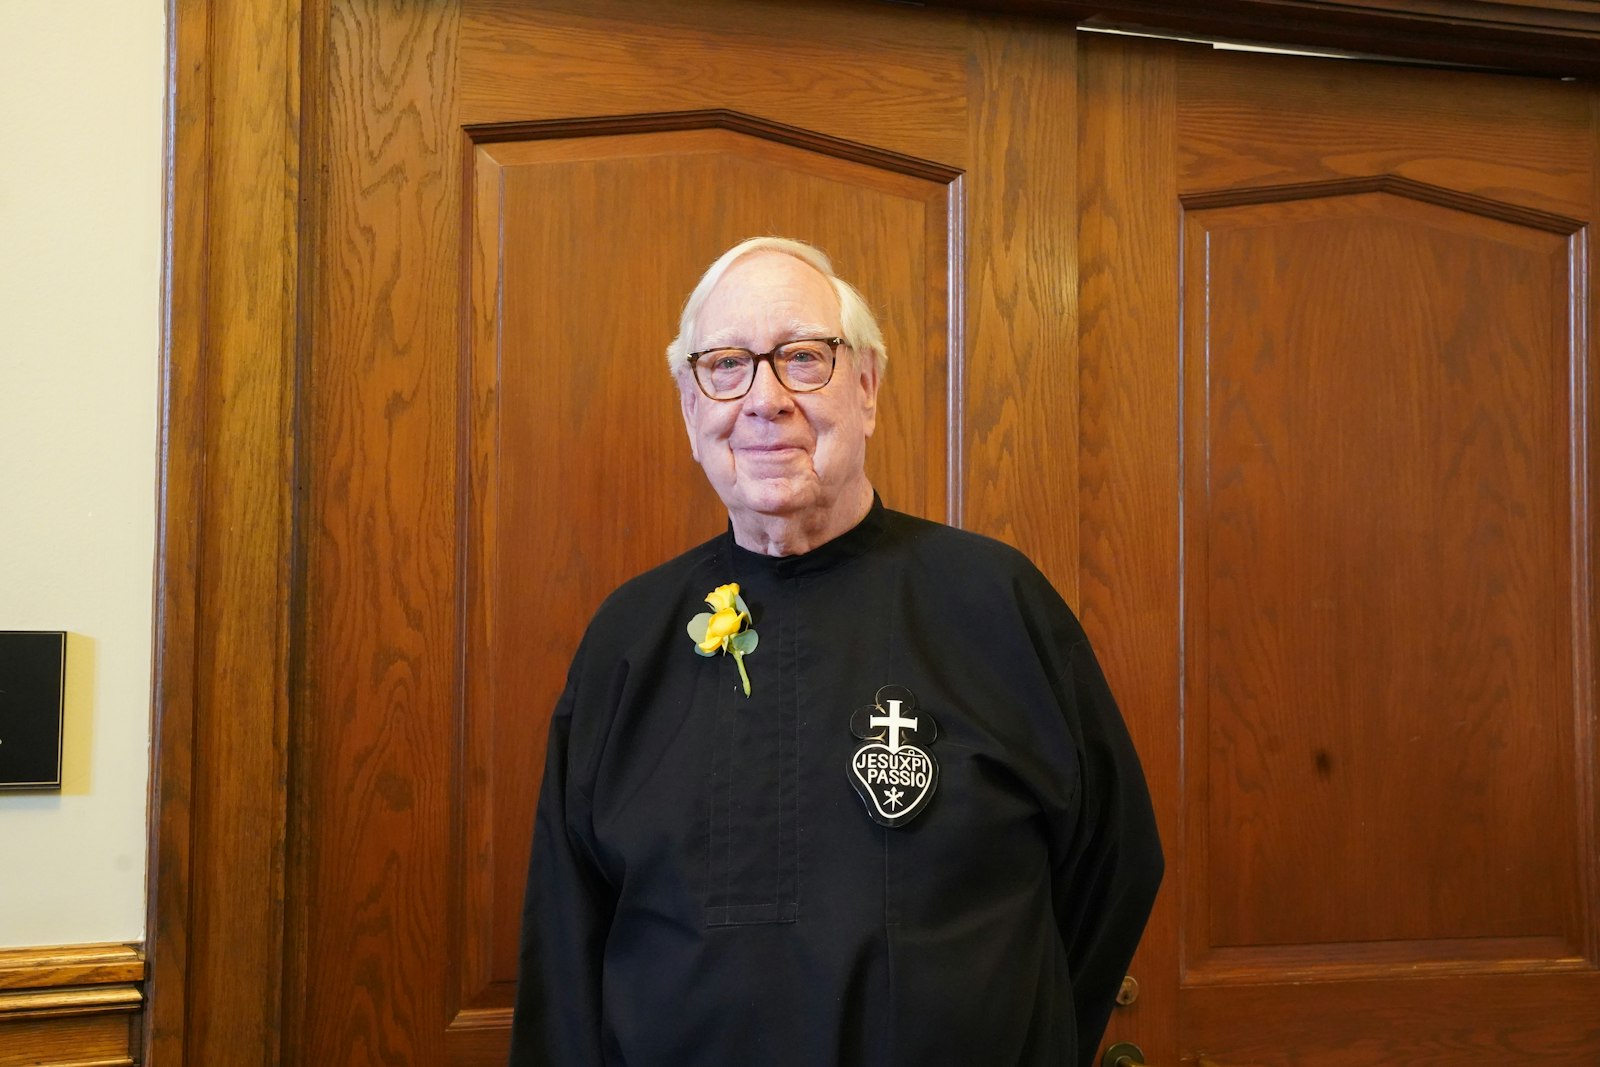 Fr. Pat Brennan, CP, has been a Passionist priest for 50 years. During that time, he's been a retreat director, preacher, novice director and formation director for seminarians.